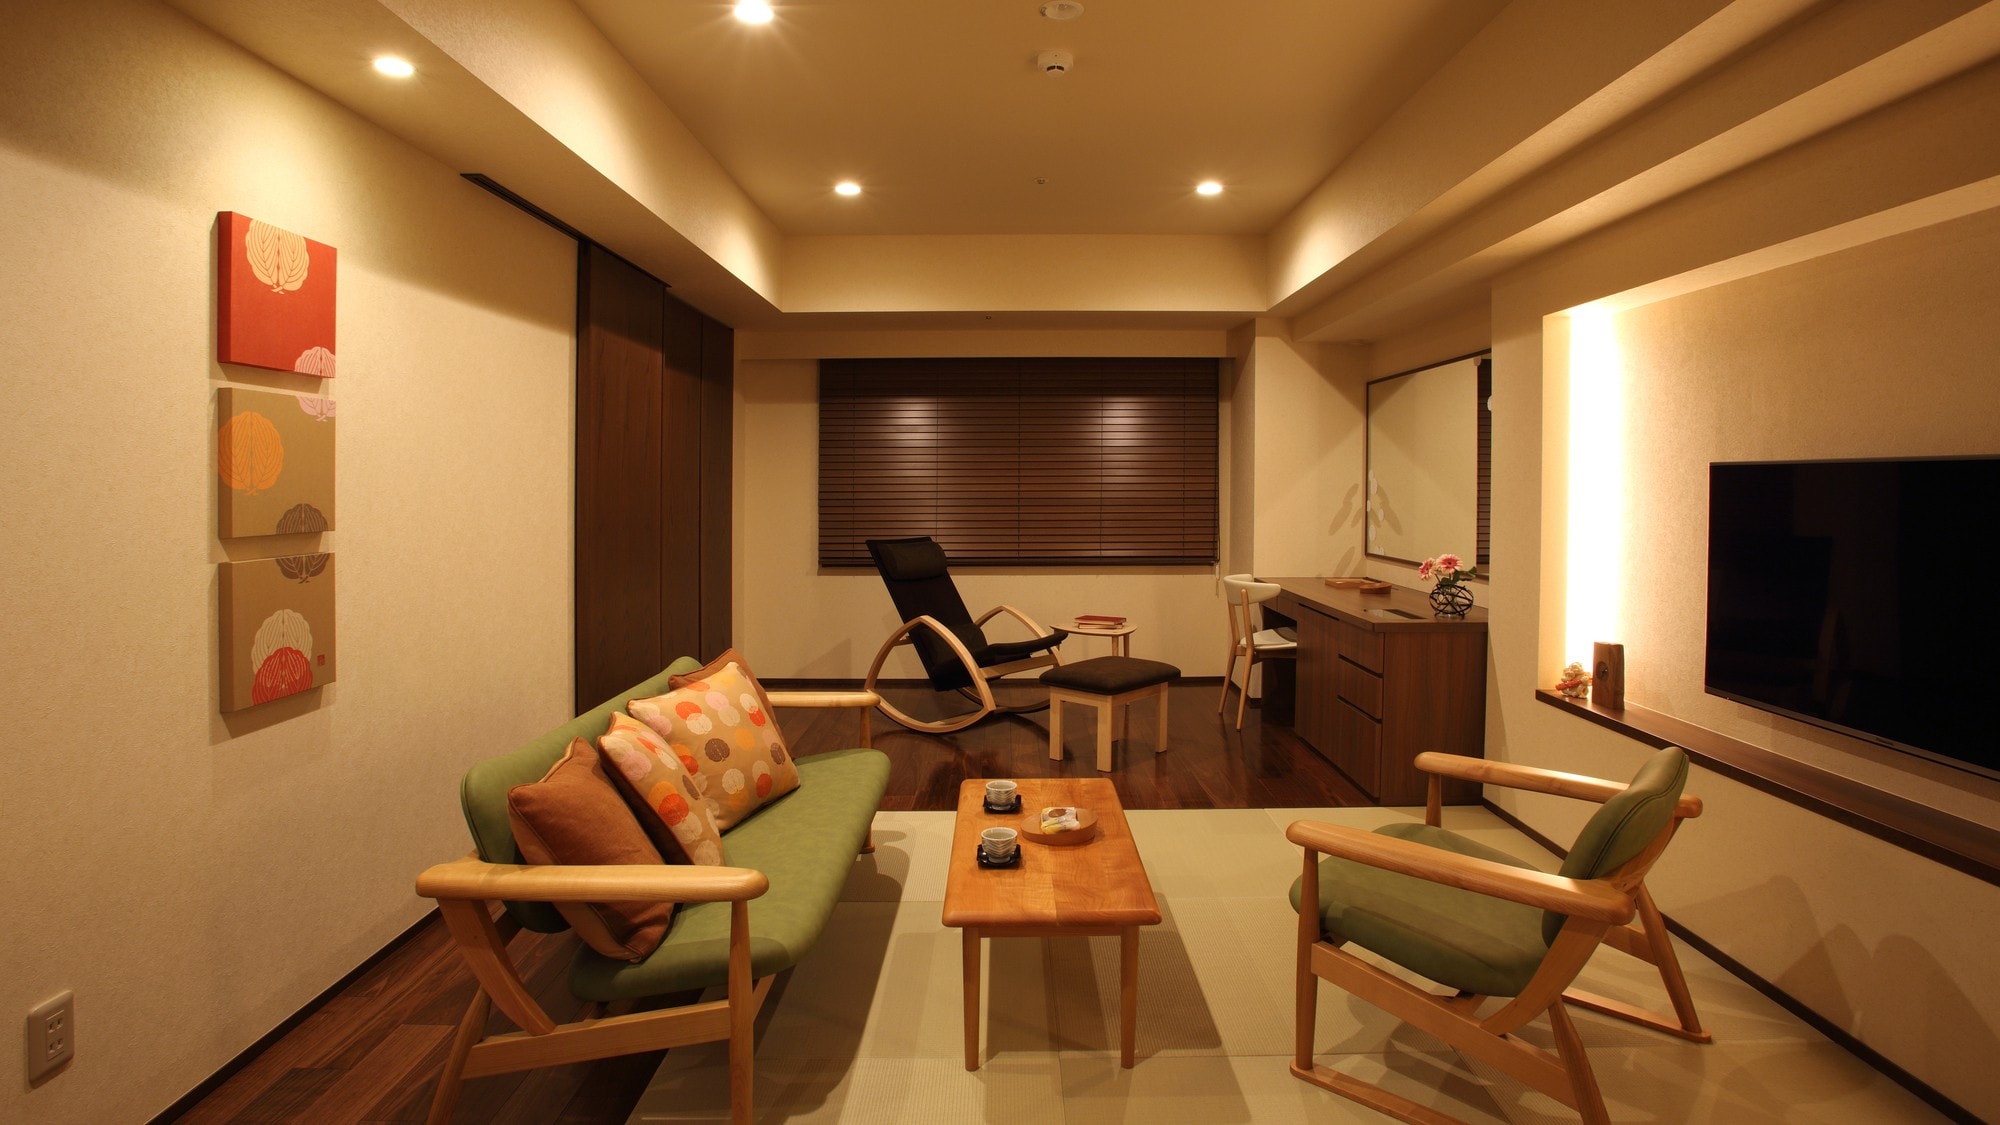 [Guest room] Suite with open-air hot spring bath "Raku" (example)